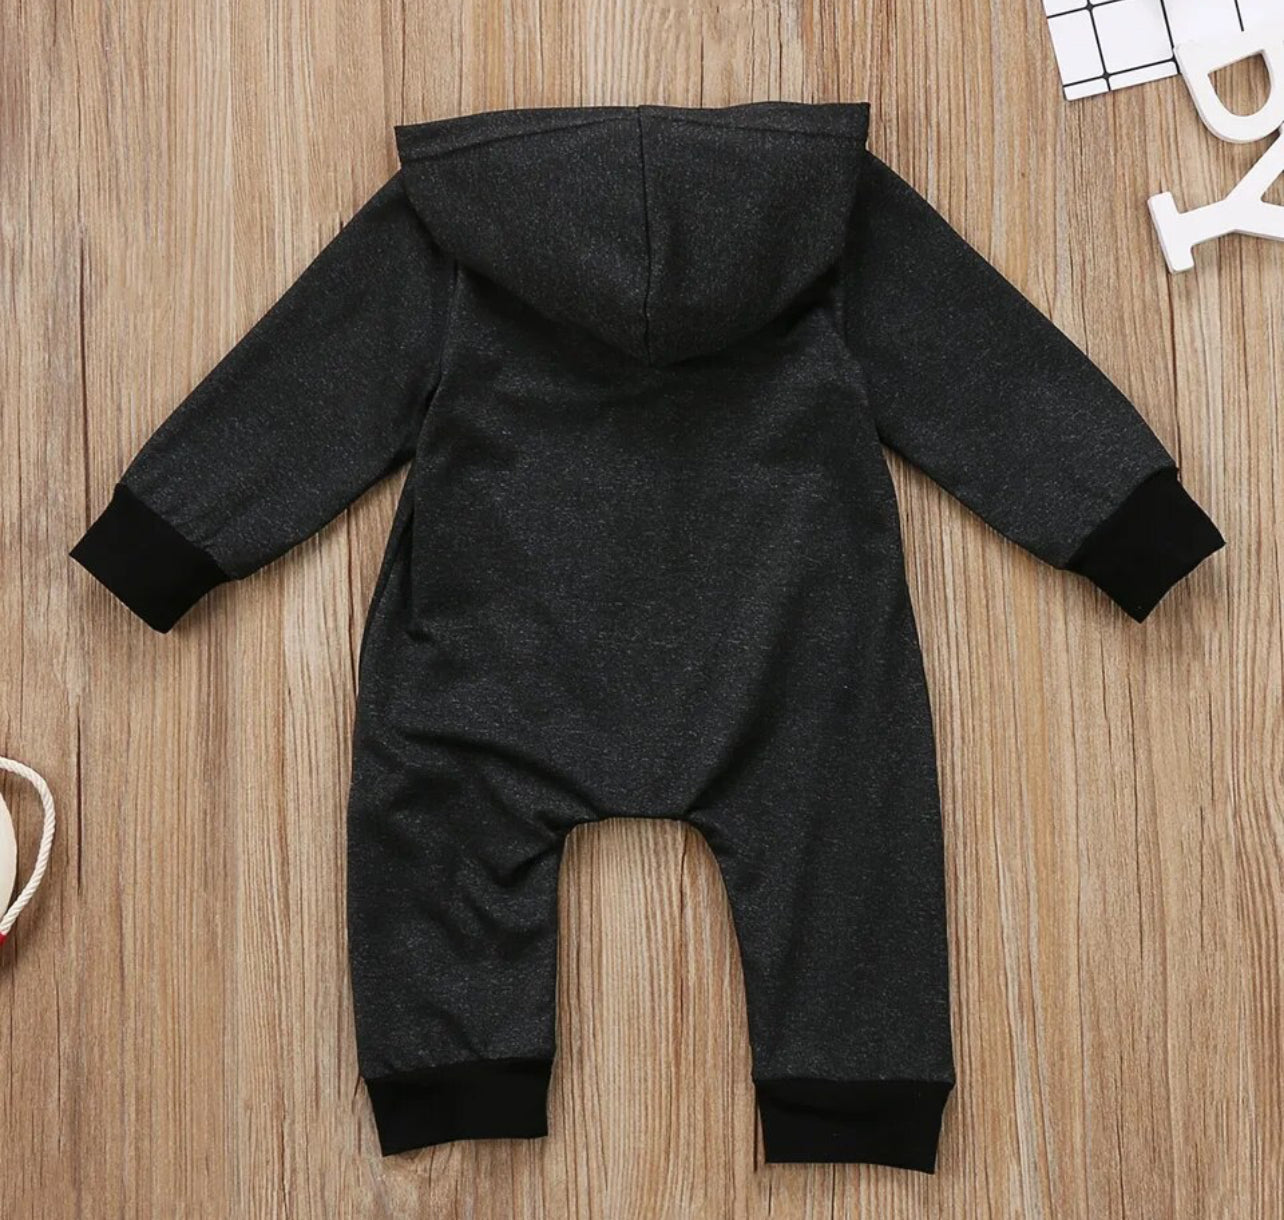 Long Sleeve Zipper, Romper Hooded Outfit